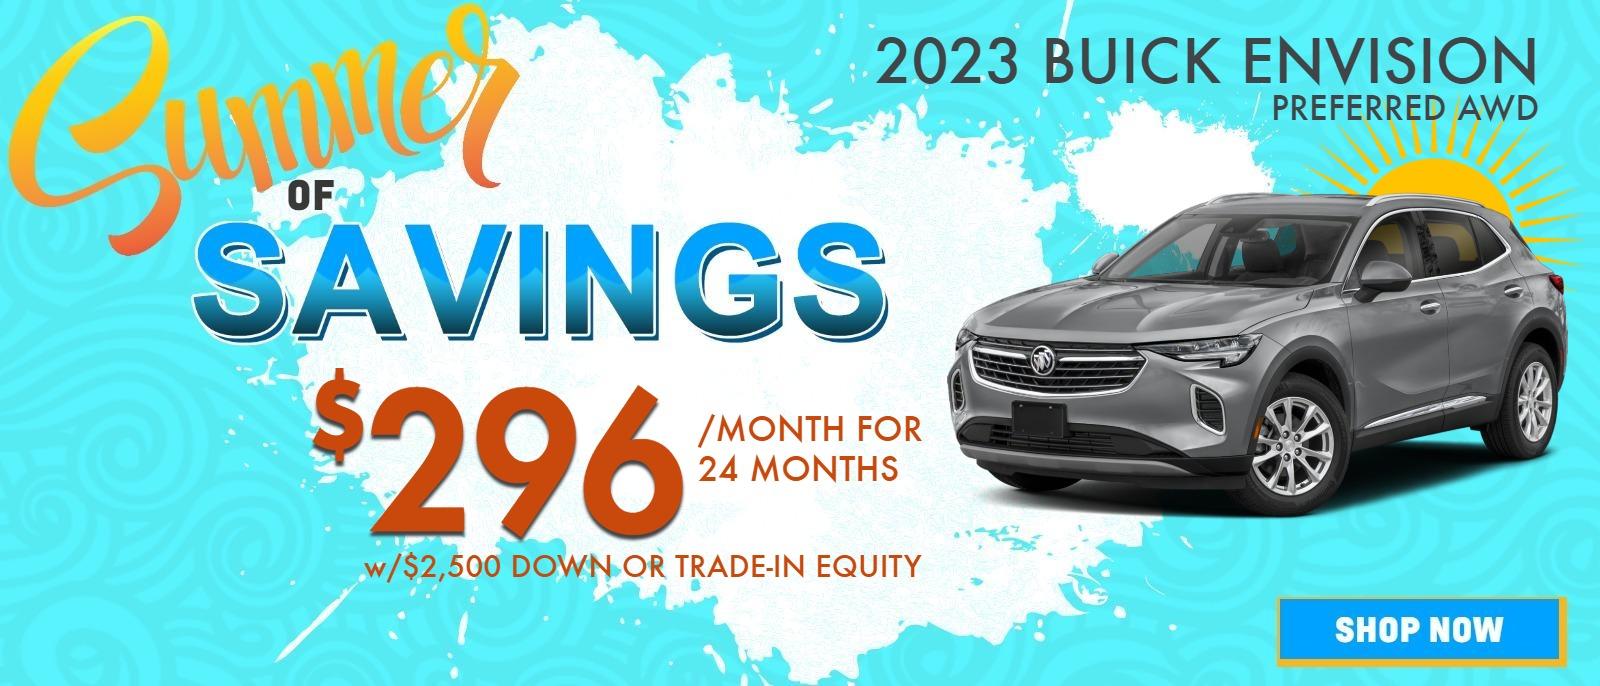 LEASE A 2023 ENVISION PREFERRED AWD FOR $296 PER MONTH FOR 24 MONTHS FROM MIKE YOUNG BUICK GMC IN FRANKENMUTH, MI